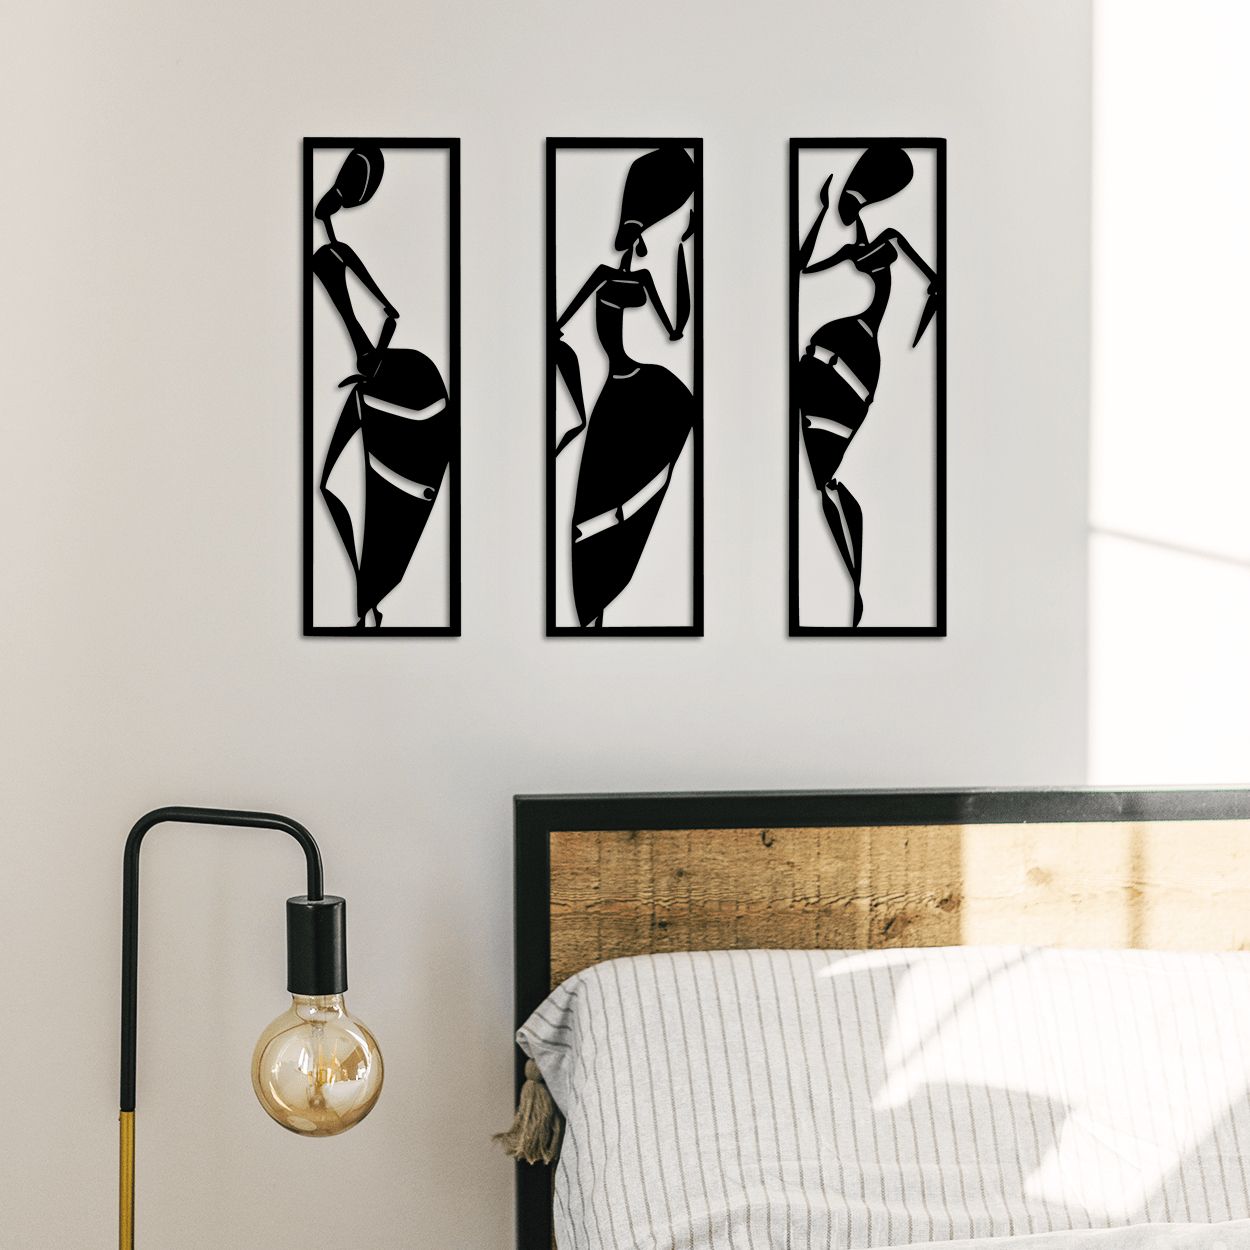 Elegant Wall Art, Modern Wall Art For Homestagum Pertaining To 3 Layers Wall Sculptures (View 12 of 15)